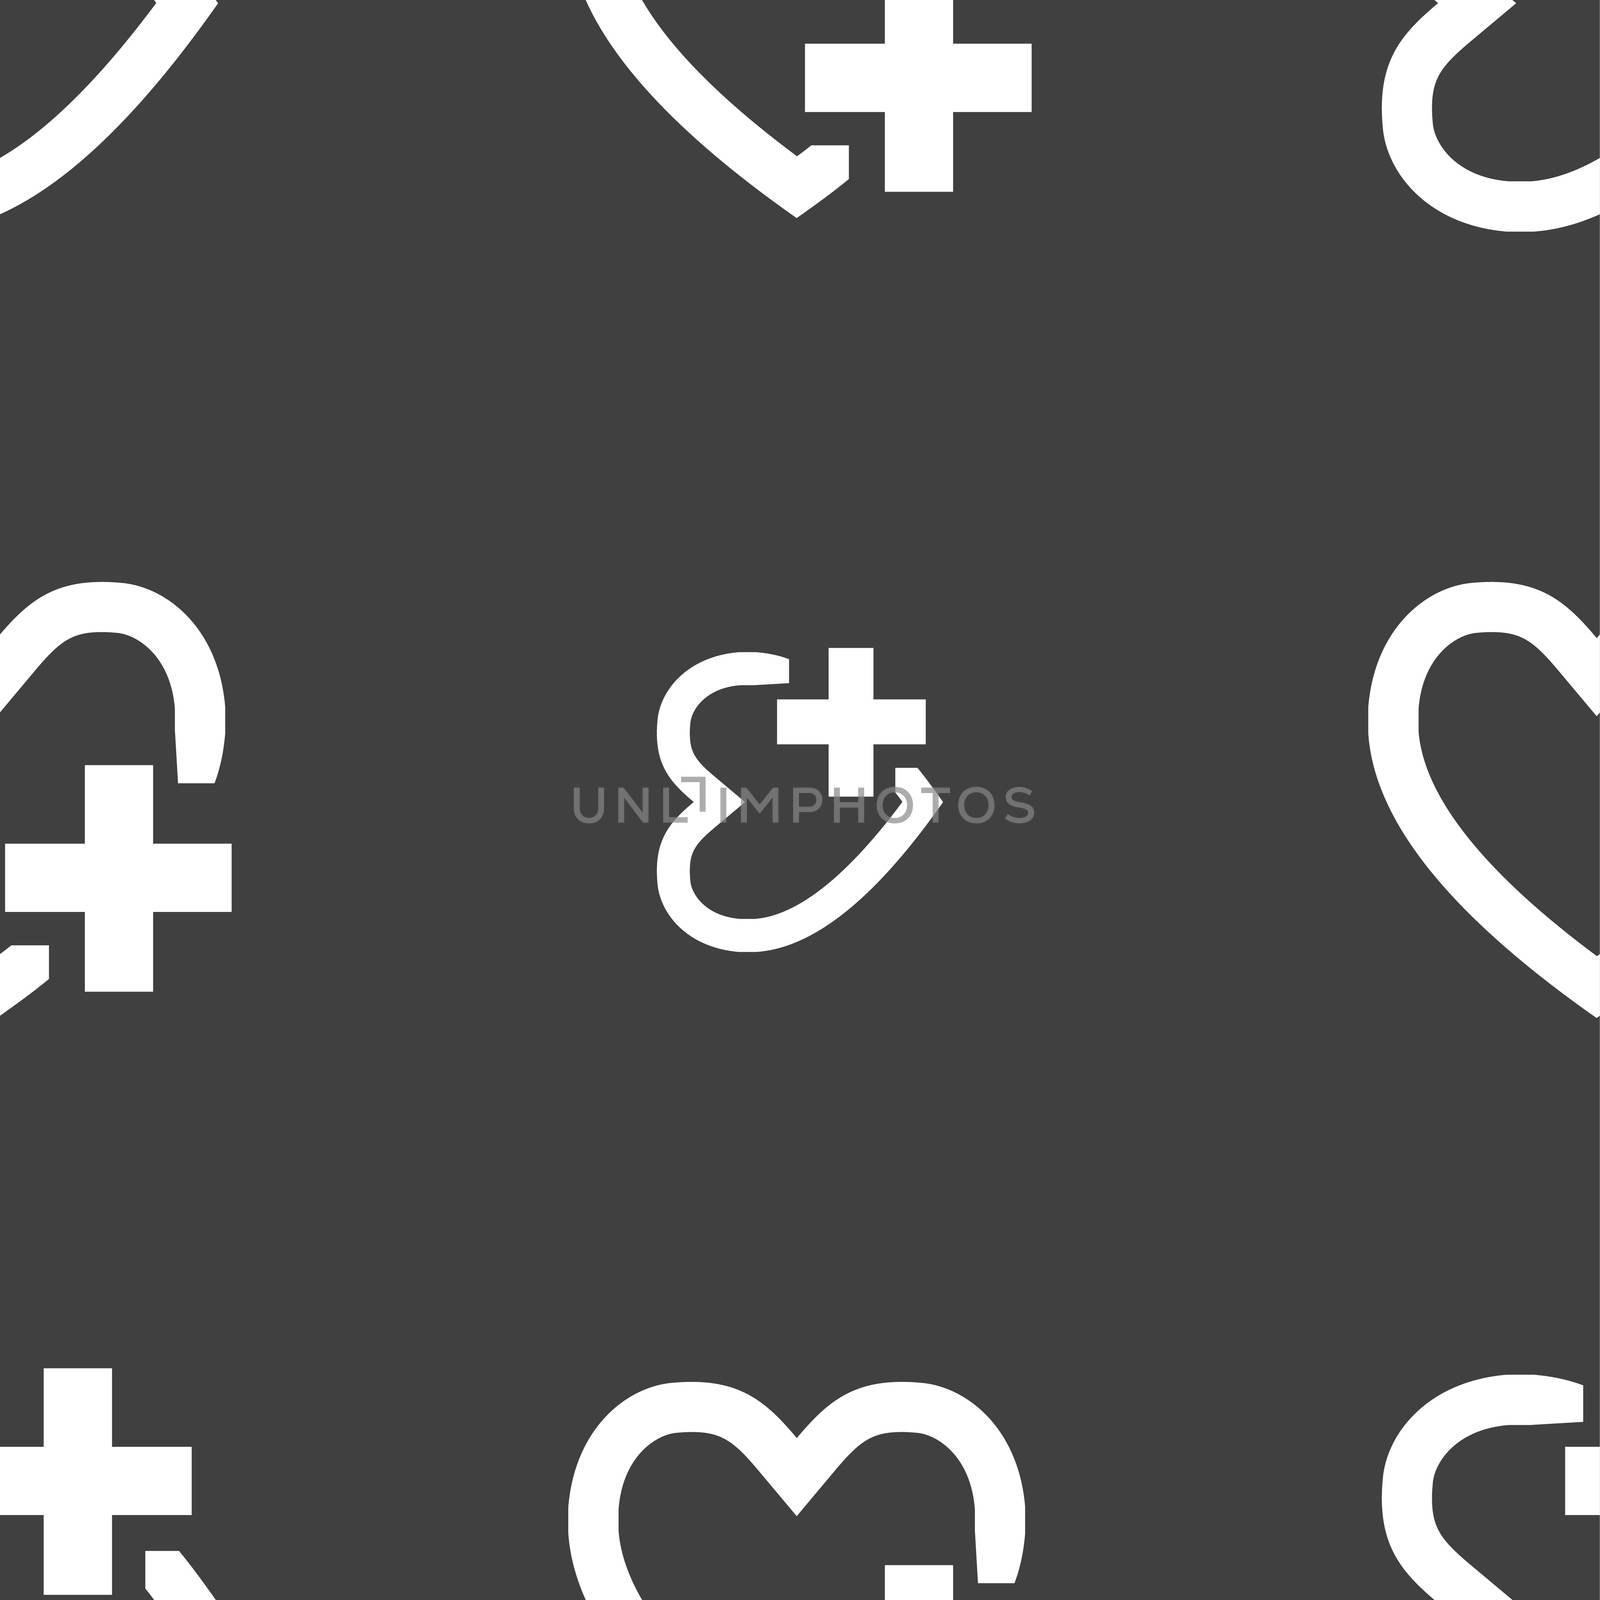 Heart sign icon. Love symbol. Seamless pattern on a gray background.  by serhii_lohvyniuk